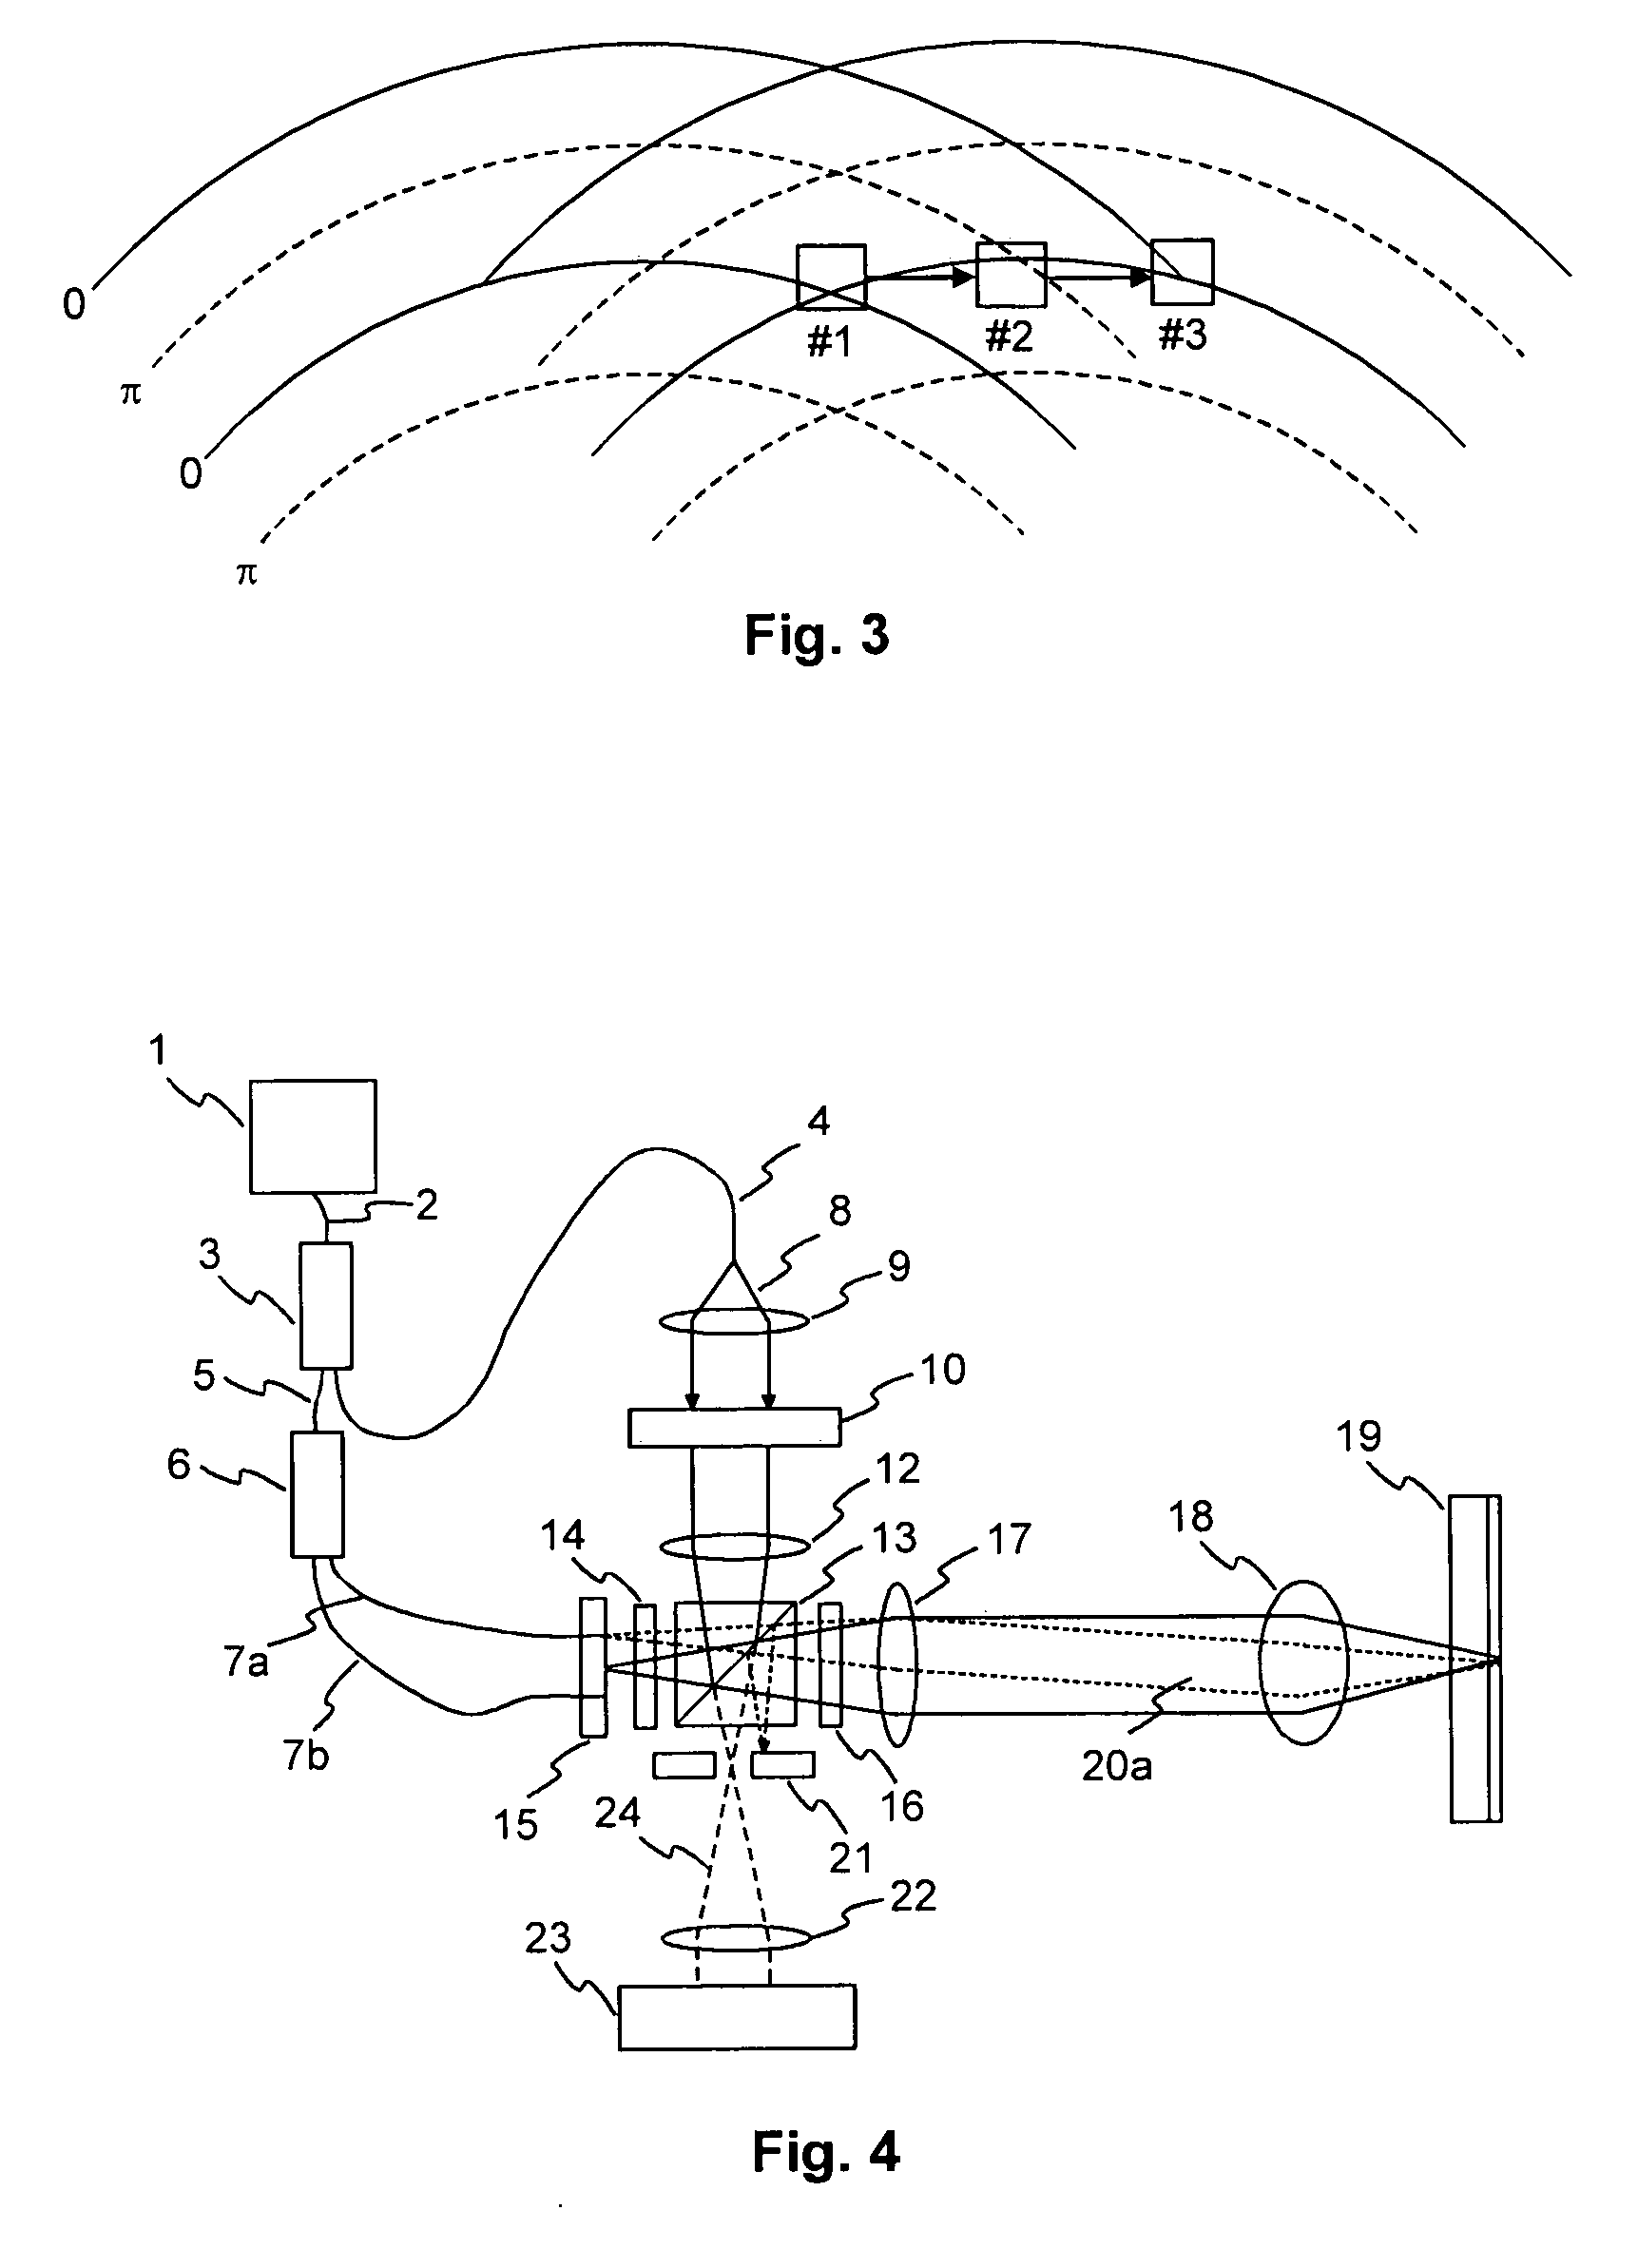 Holographic storage system with multiple reference beams